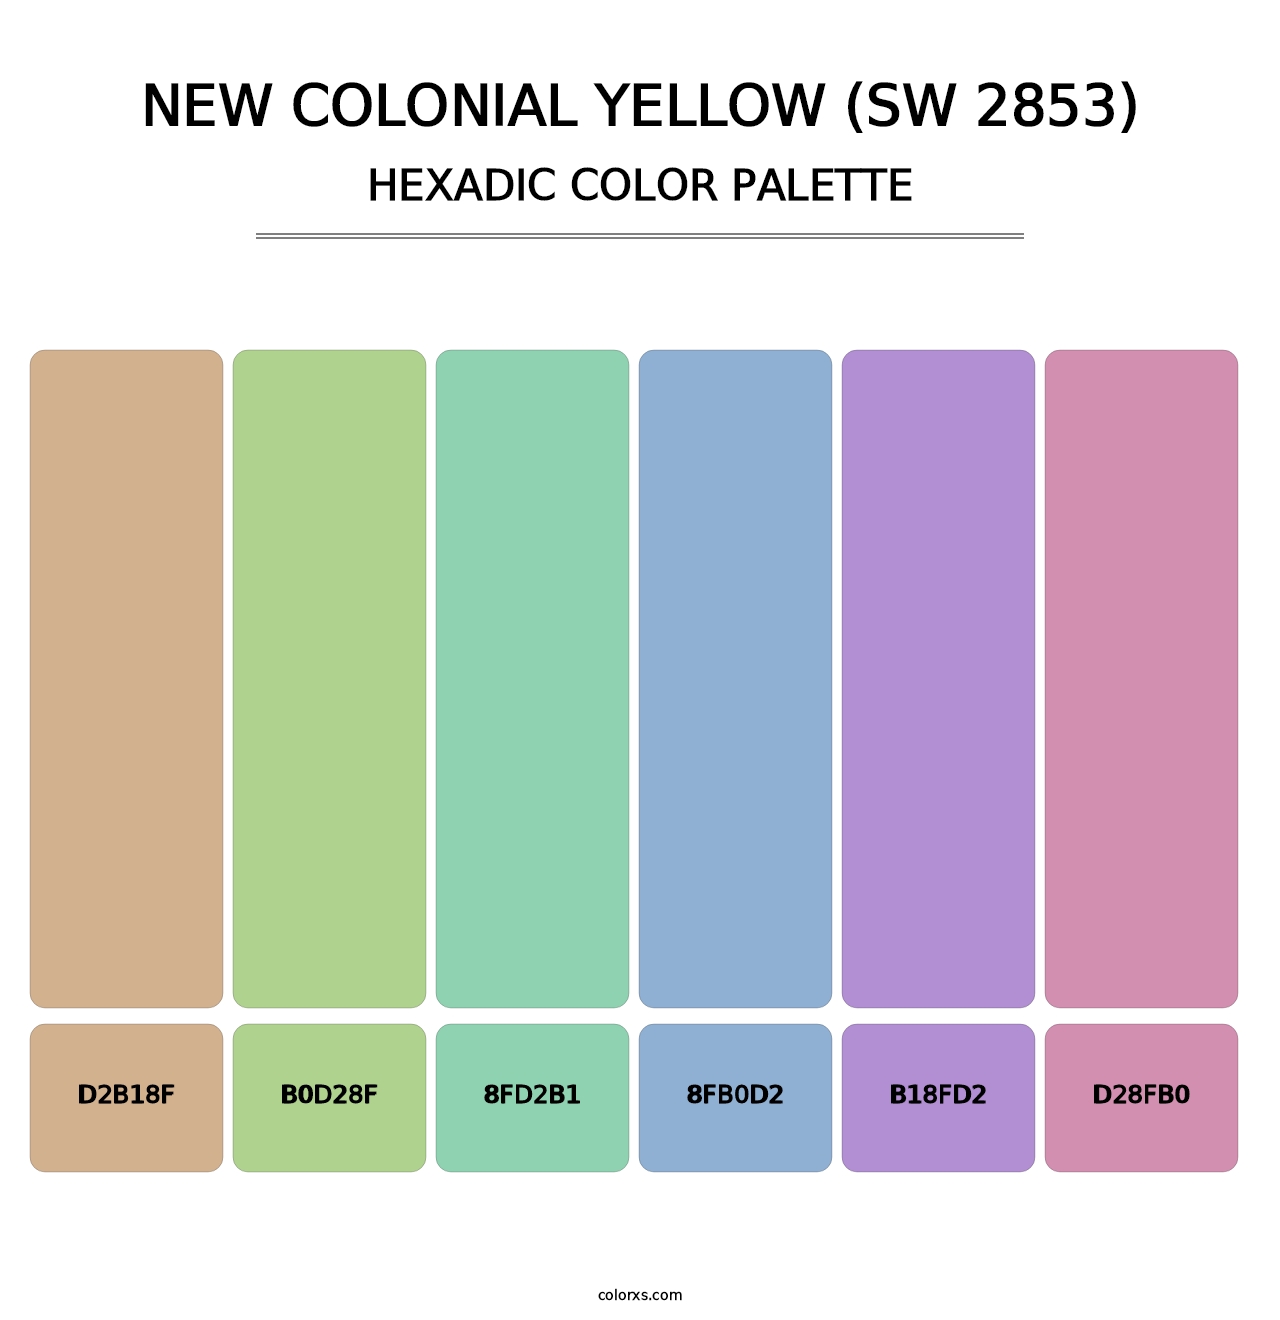 New Colonial Yellow (SW 2853) - Hexadic Color Palette